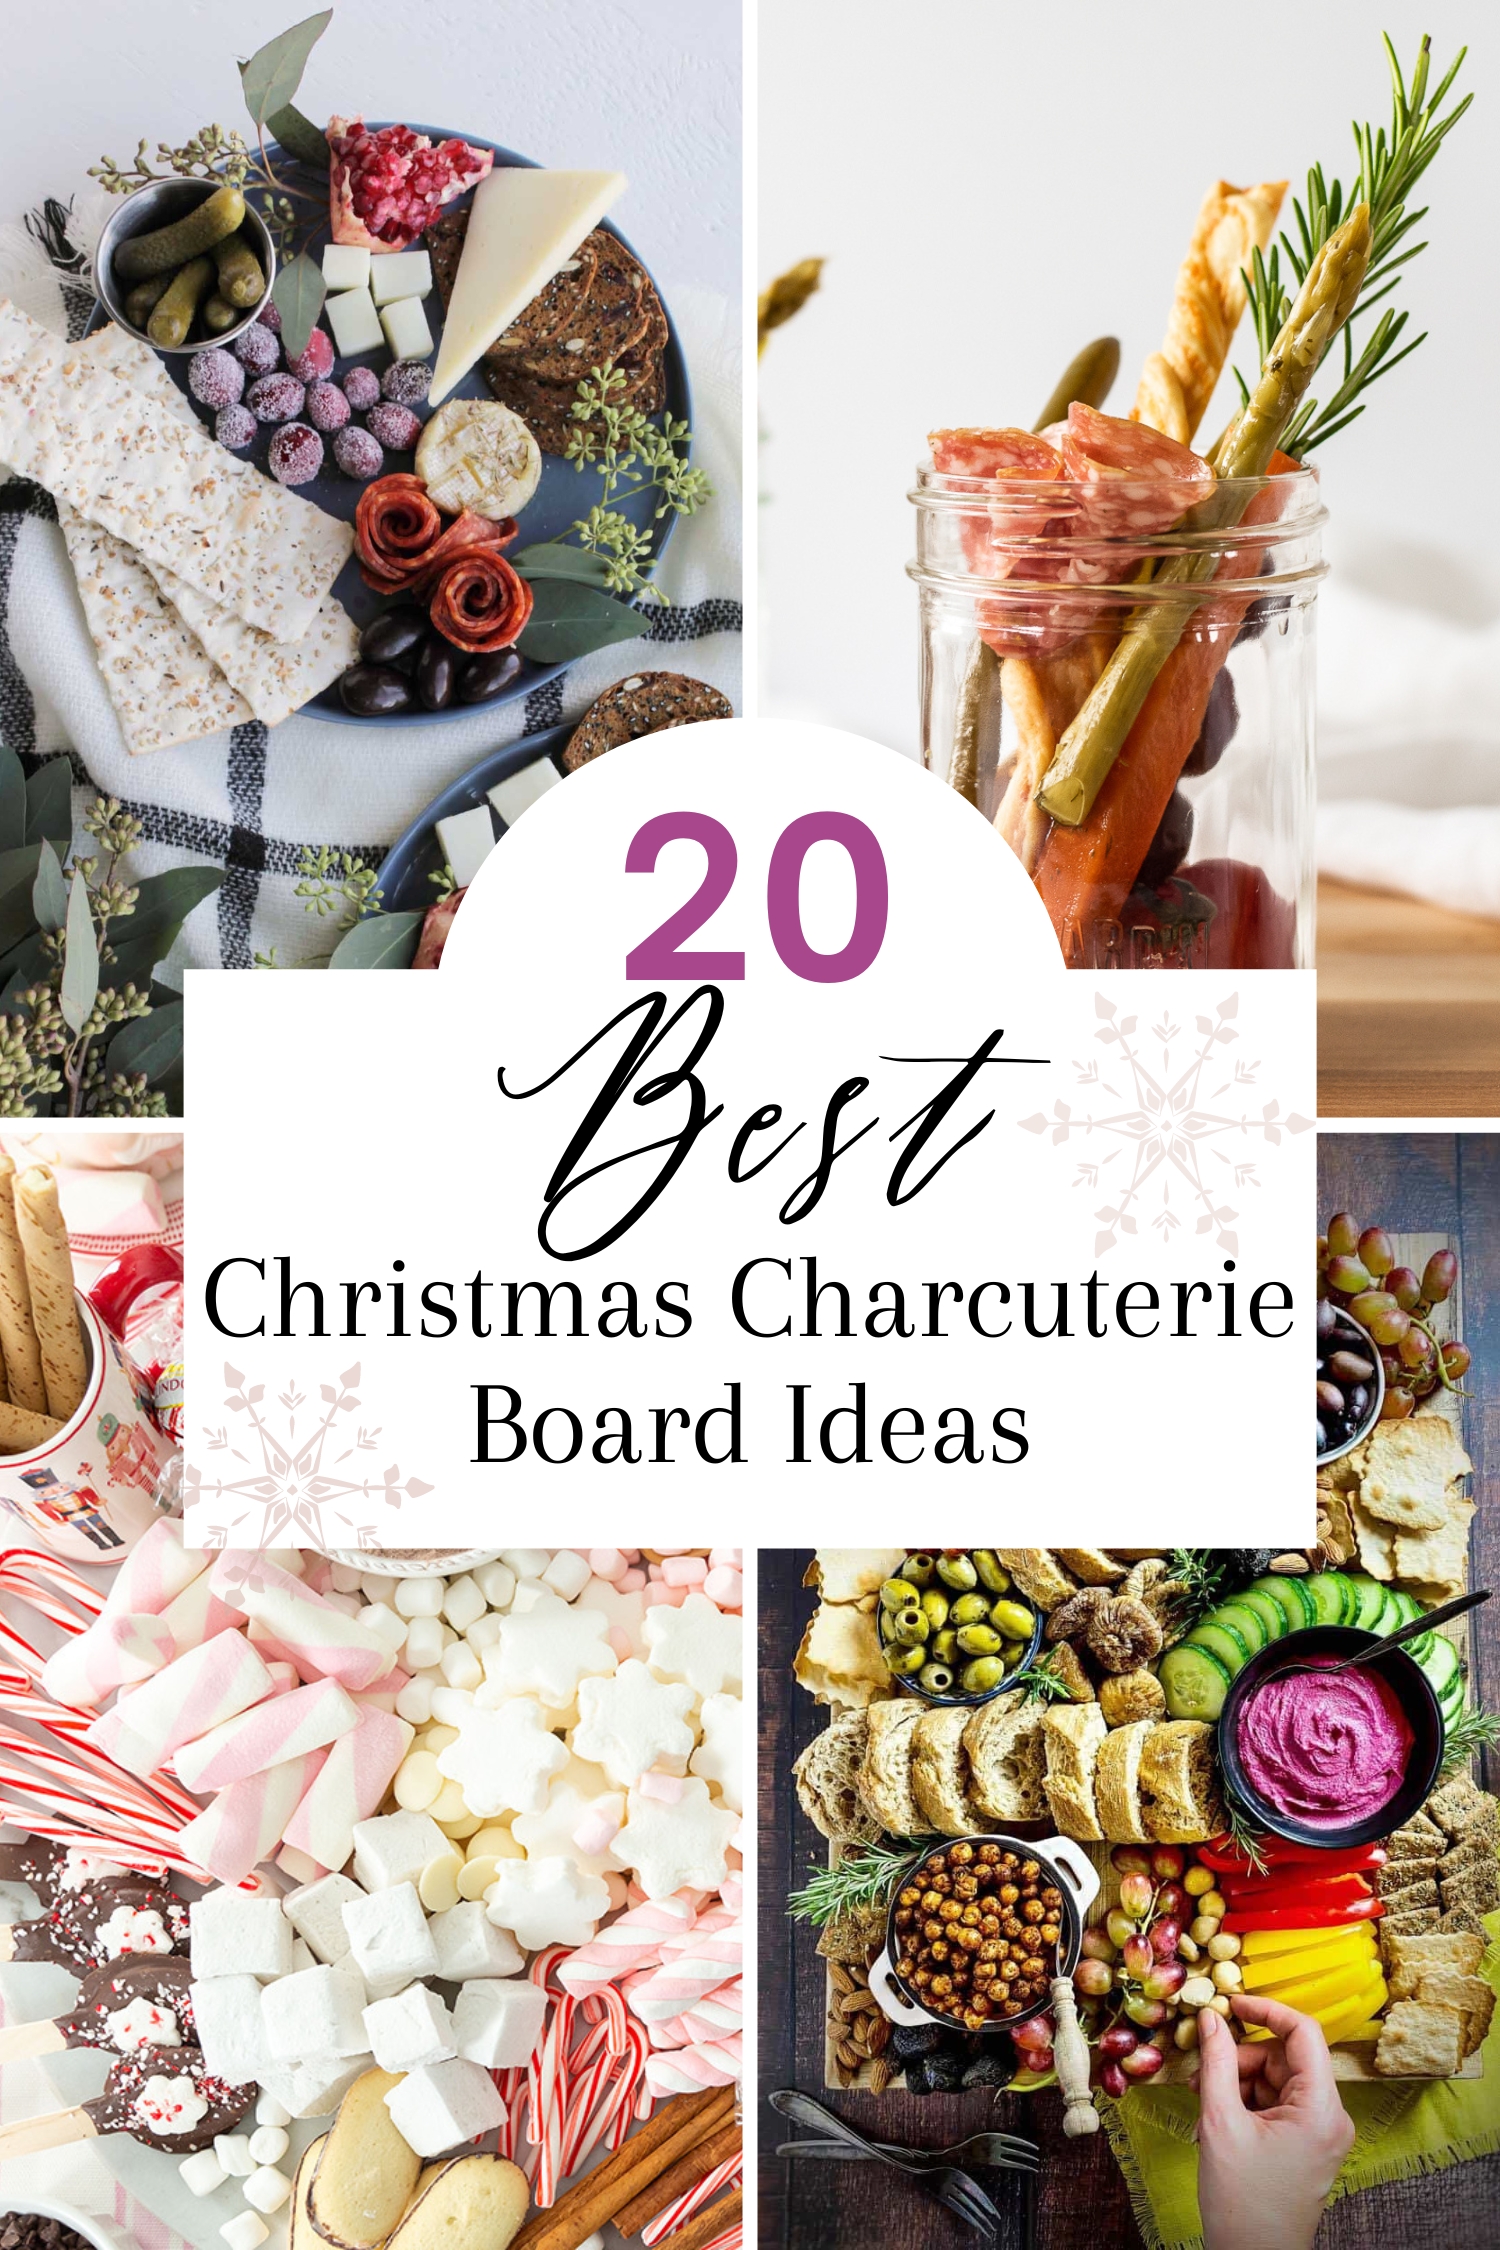 Collage of charcuterie boards with text overlay in the middle that says, "20 Best Christmas charcuterie board ideas".